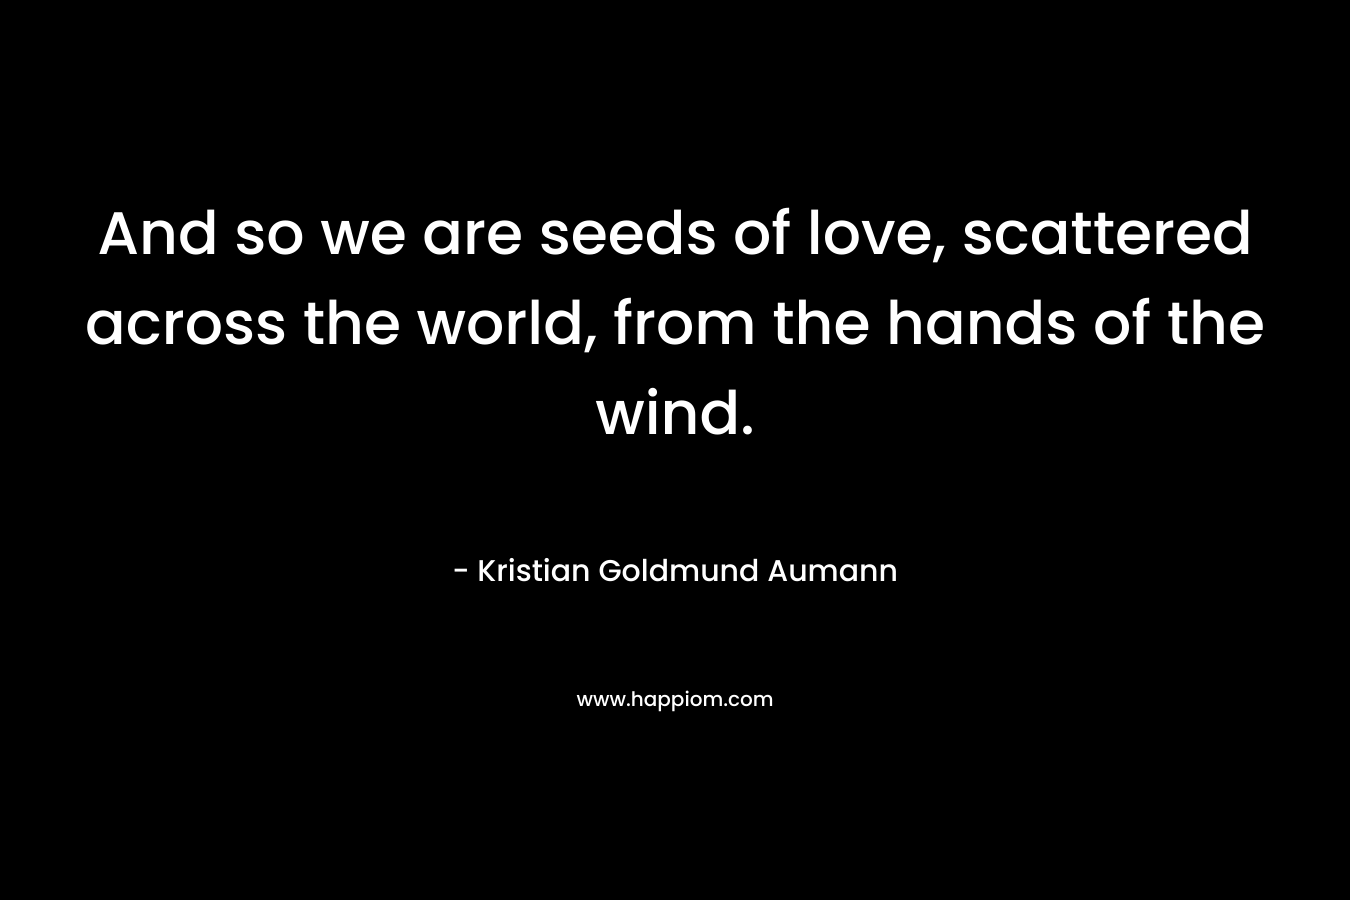 And so we are seeds of love, scattered across the world, from the hands of the wind.